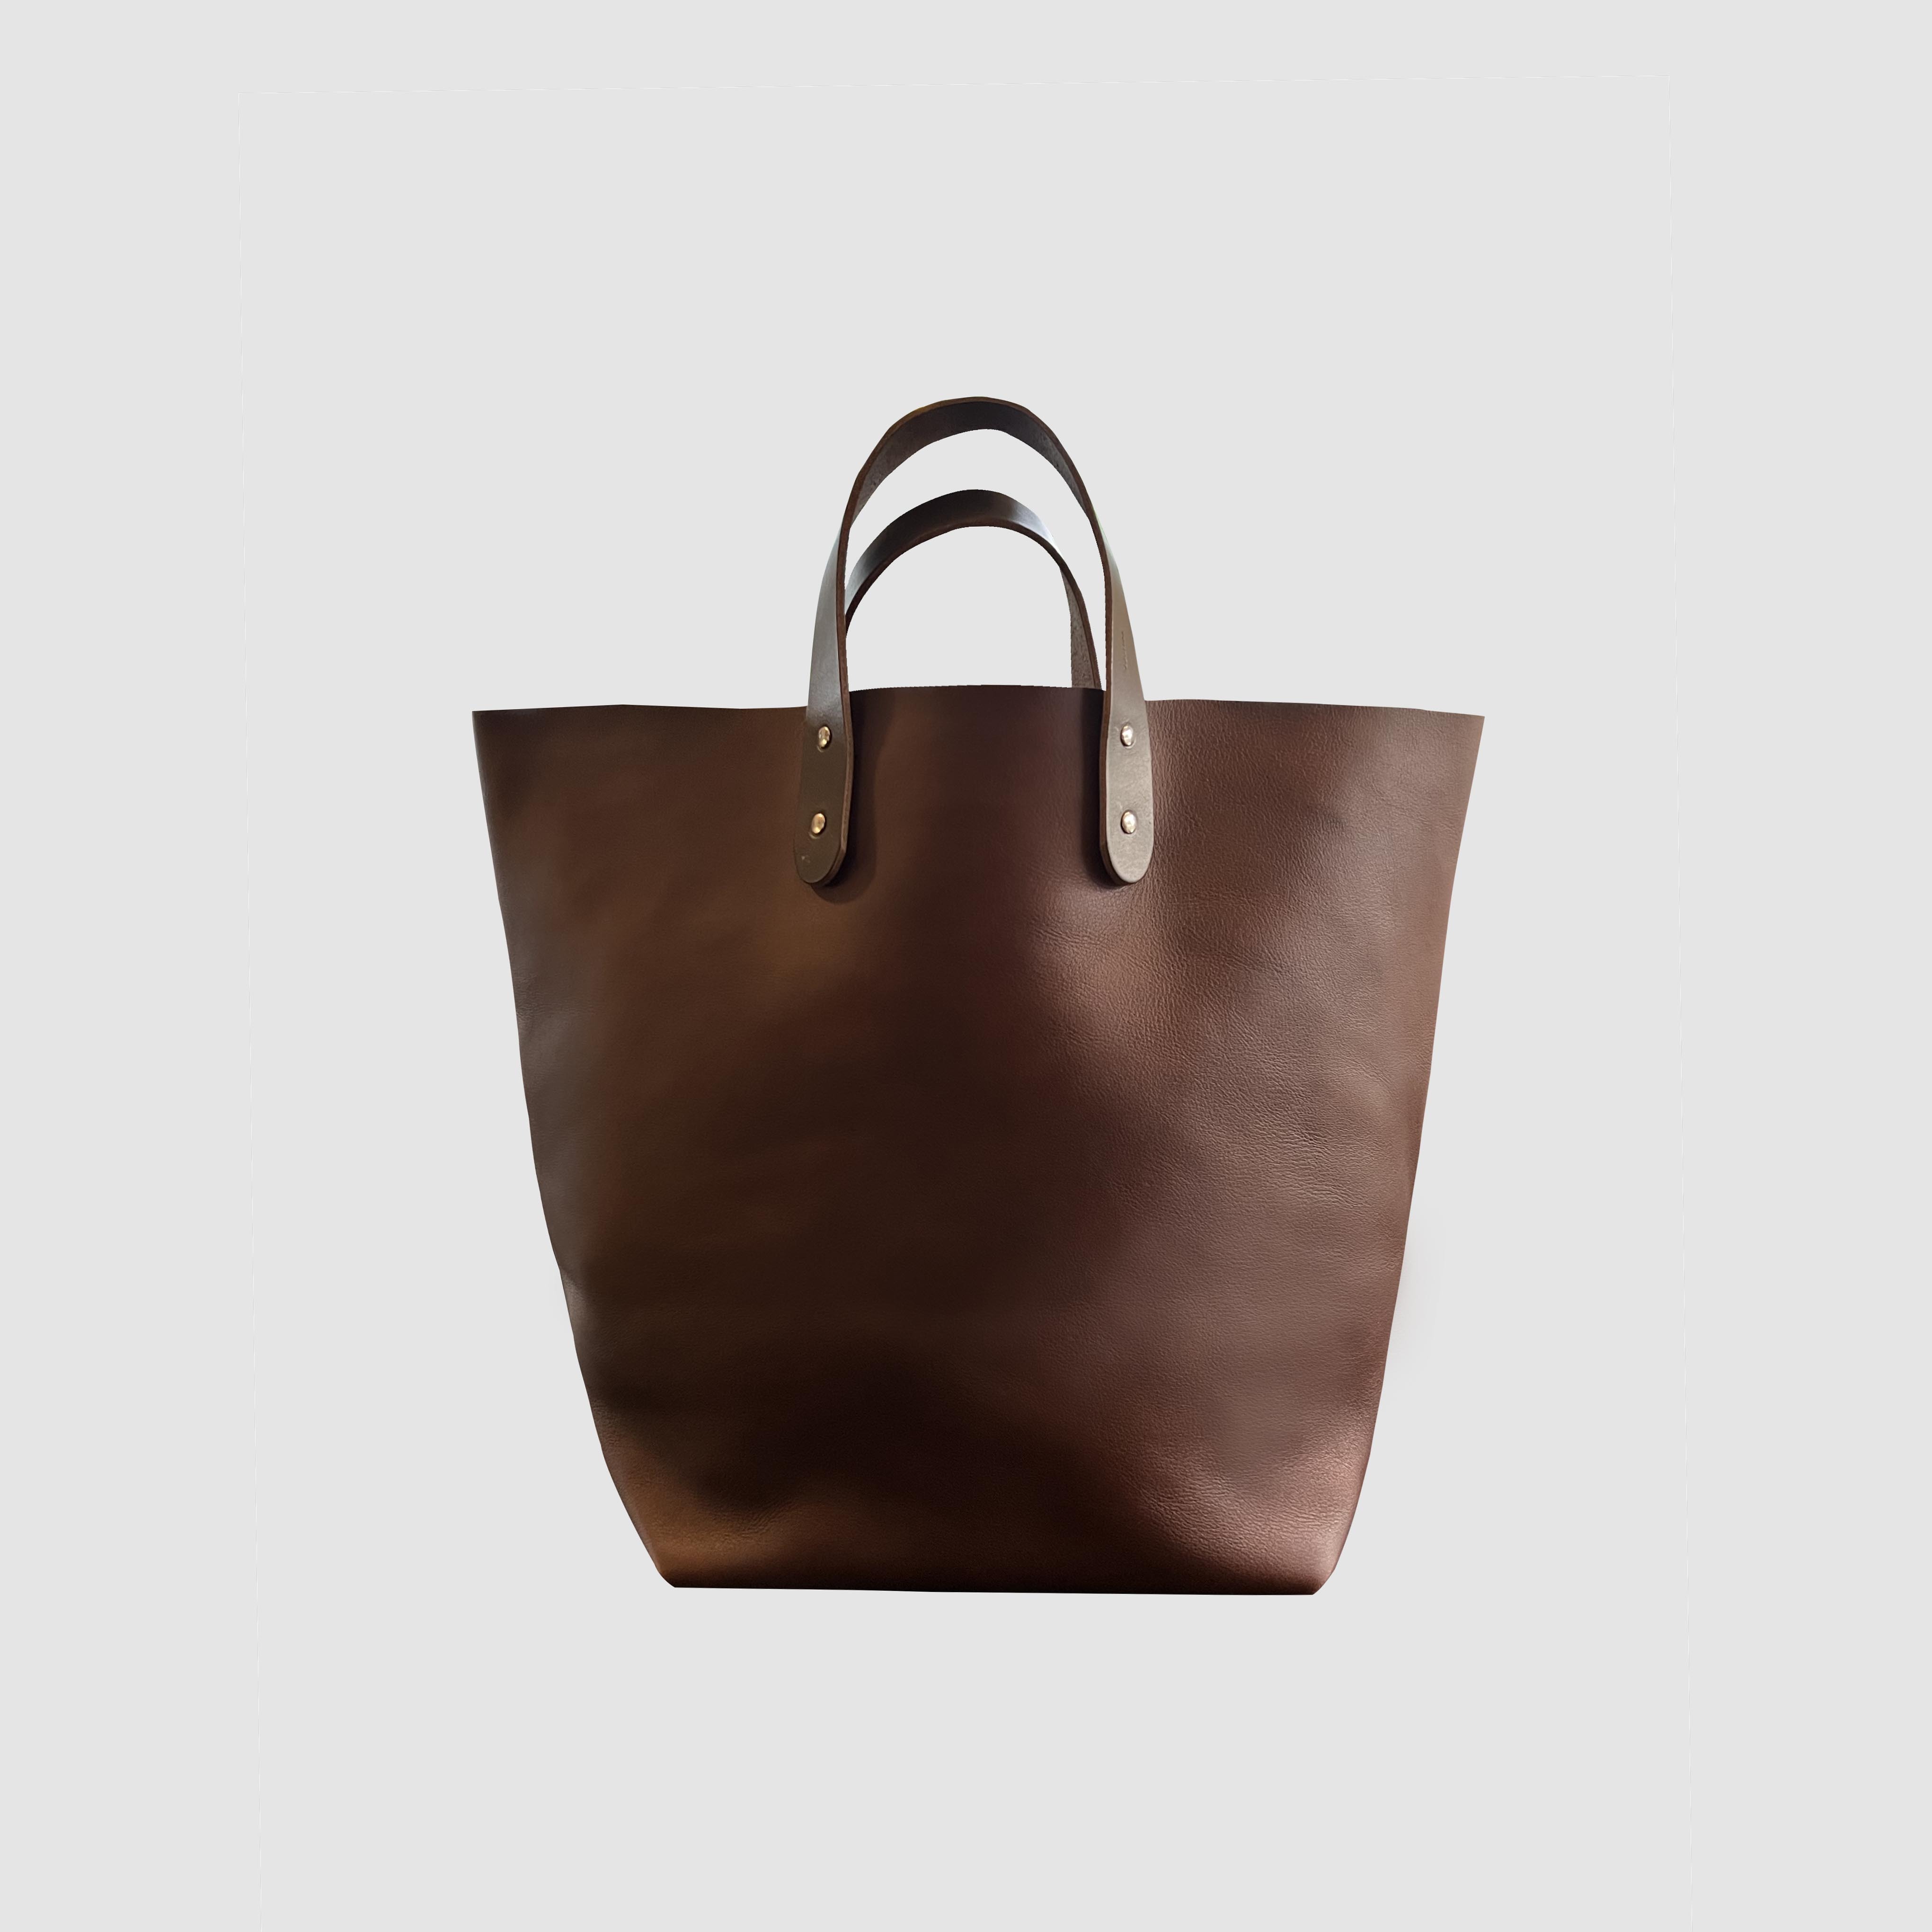 TEMBEA - delivery tote (Leather)